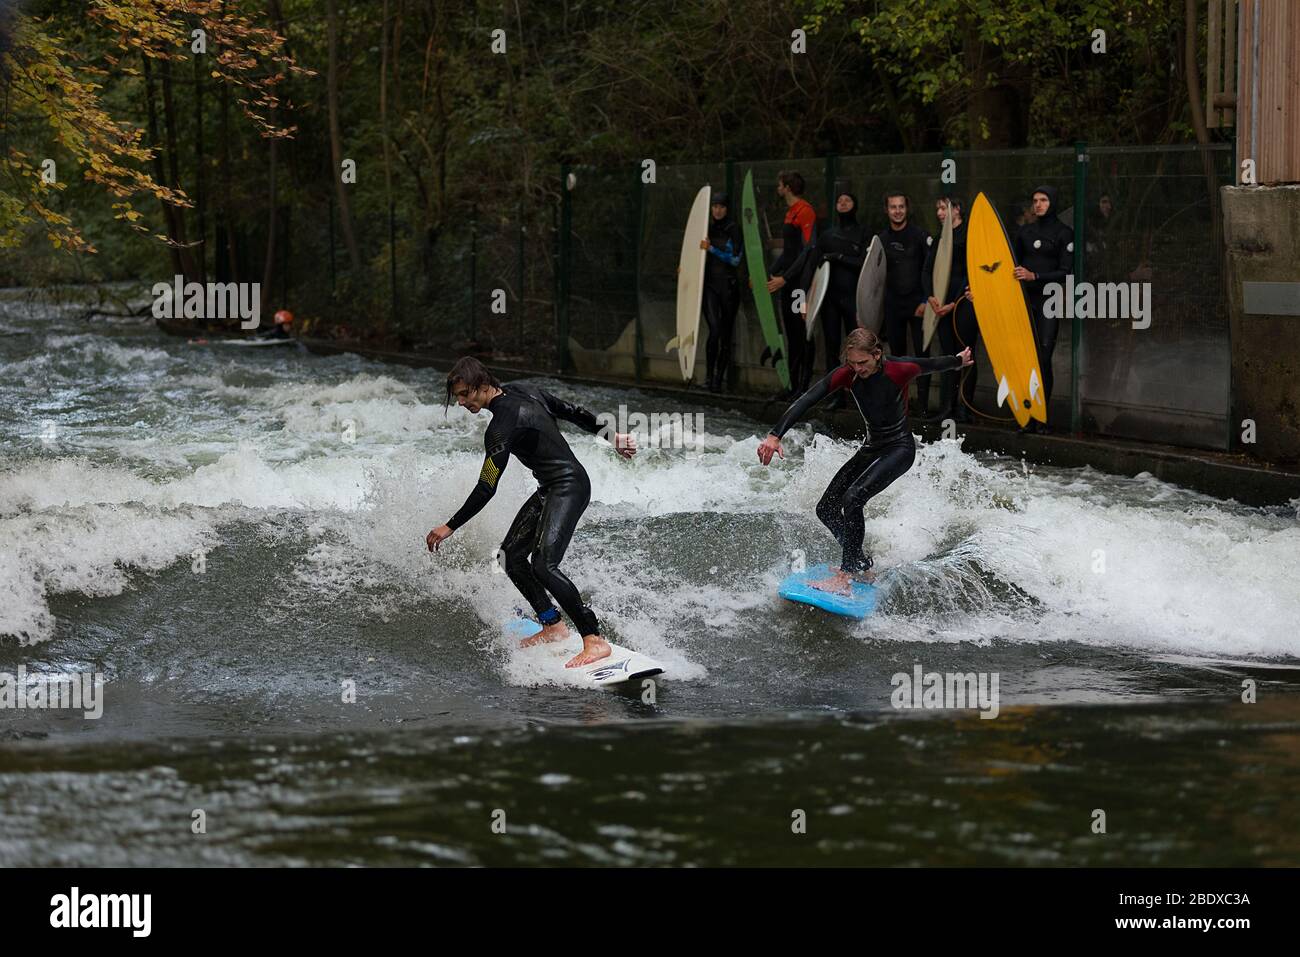 Surfers at the E2 Kleine Eisbachwelle  River Surfing spot at Munich, Germany on the river Eisbach. Stock Photo